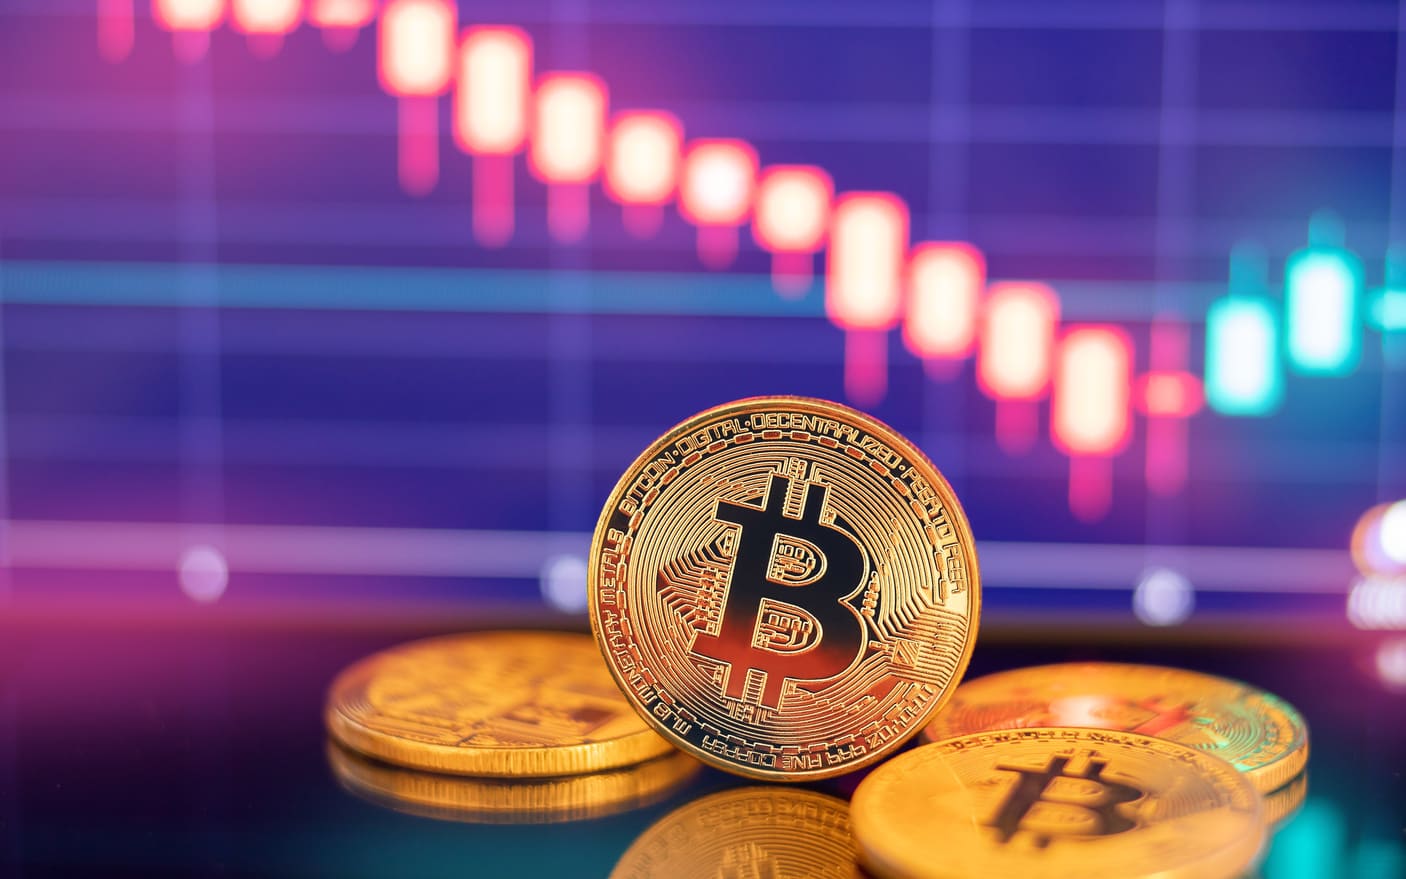 Bitcoin Stabilizes at $42,000 While Altcoins Experience Mixed Fortunes in Weekly Trading